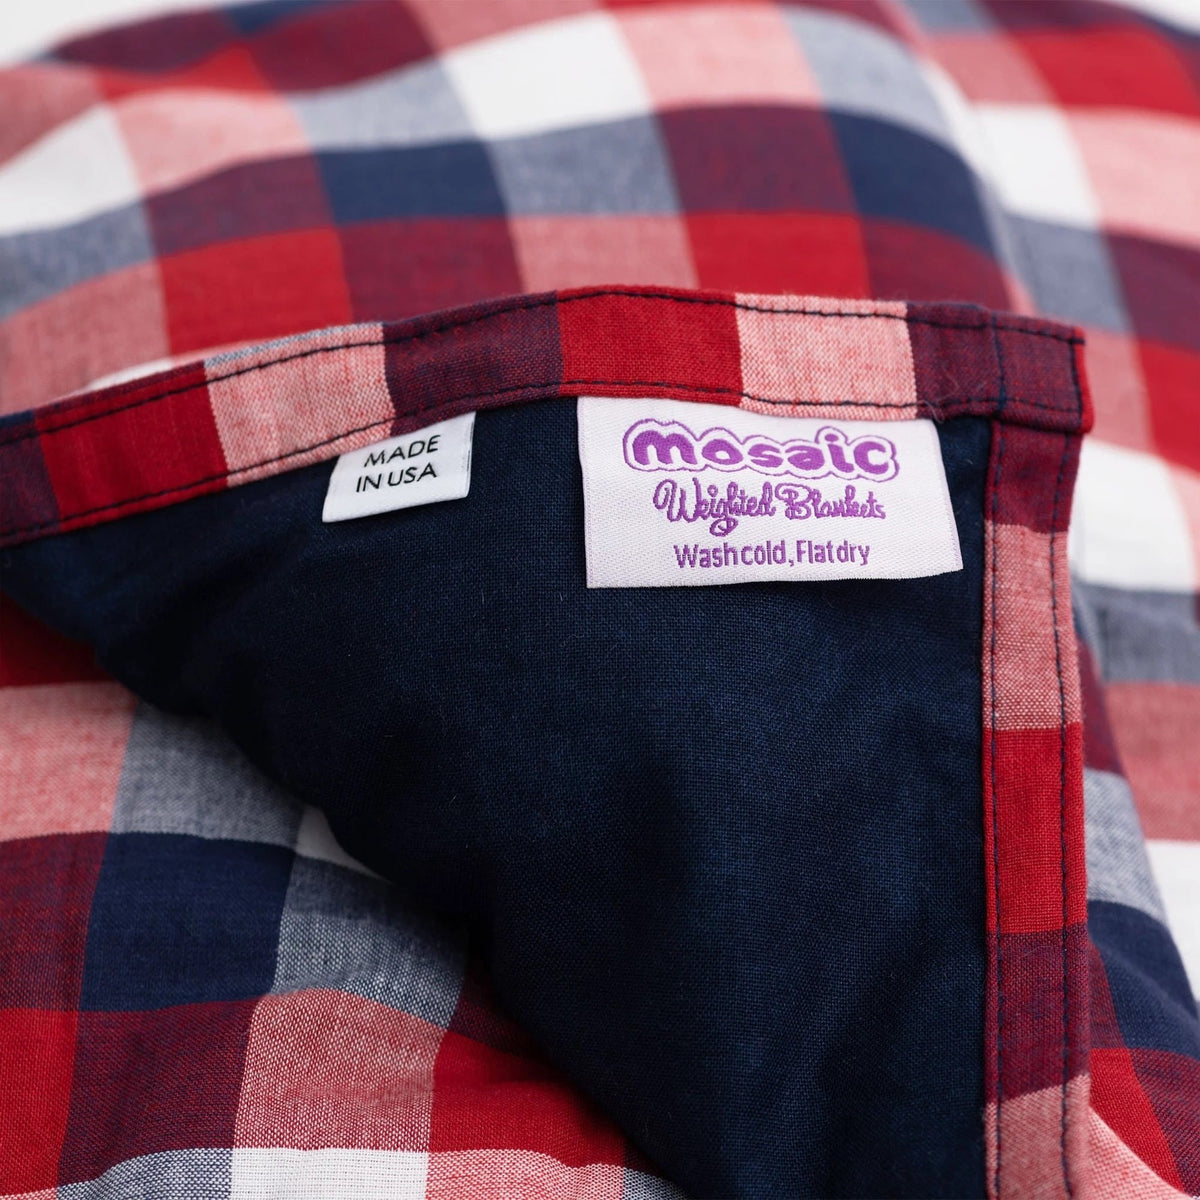 Mosaic Weighted Blankets logo tag Americana Weighted Blanket in Red White Blue Plaid 